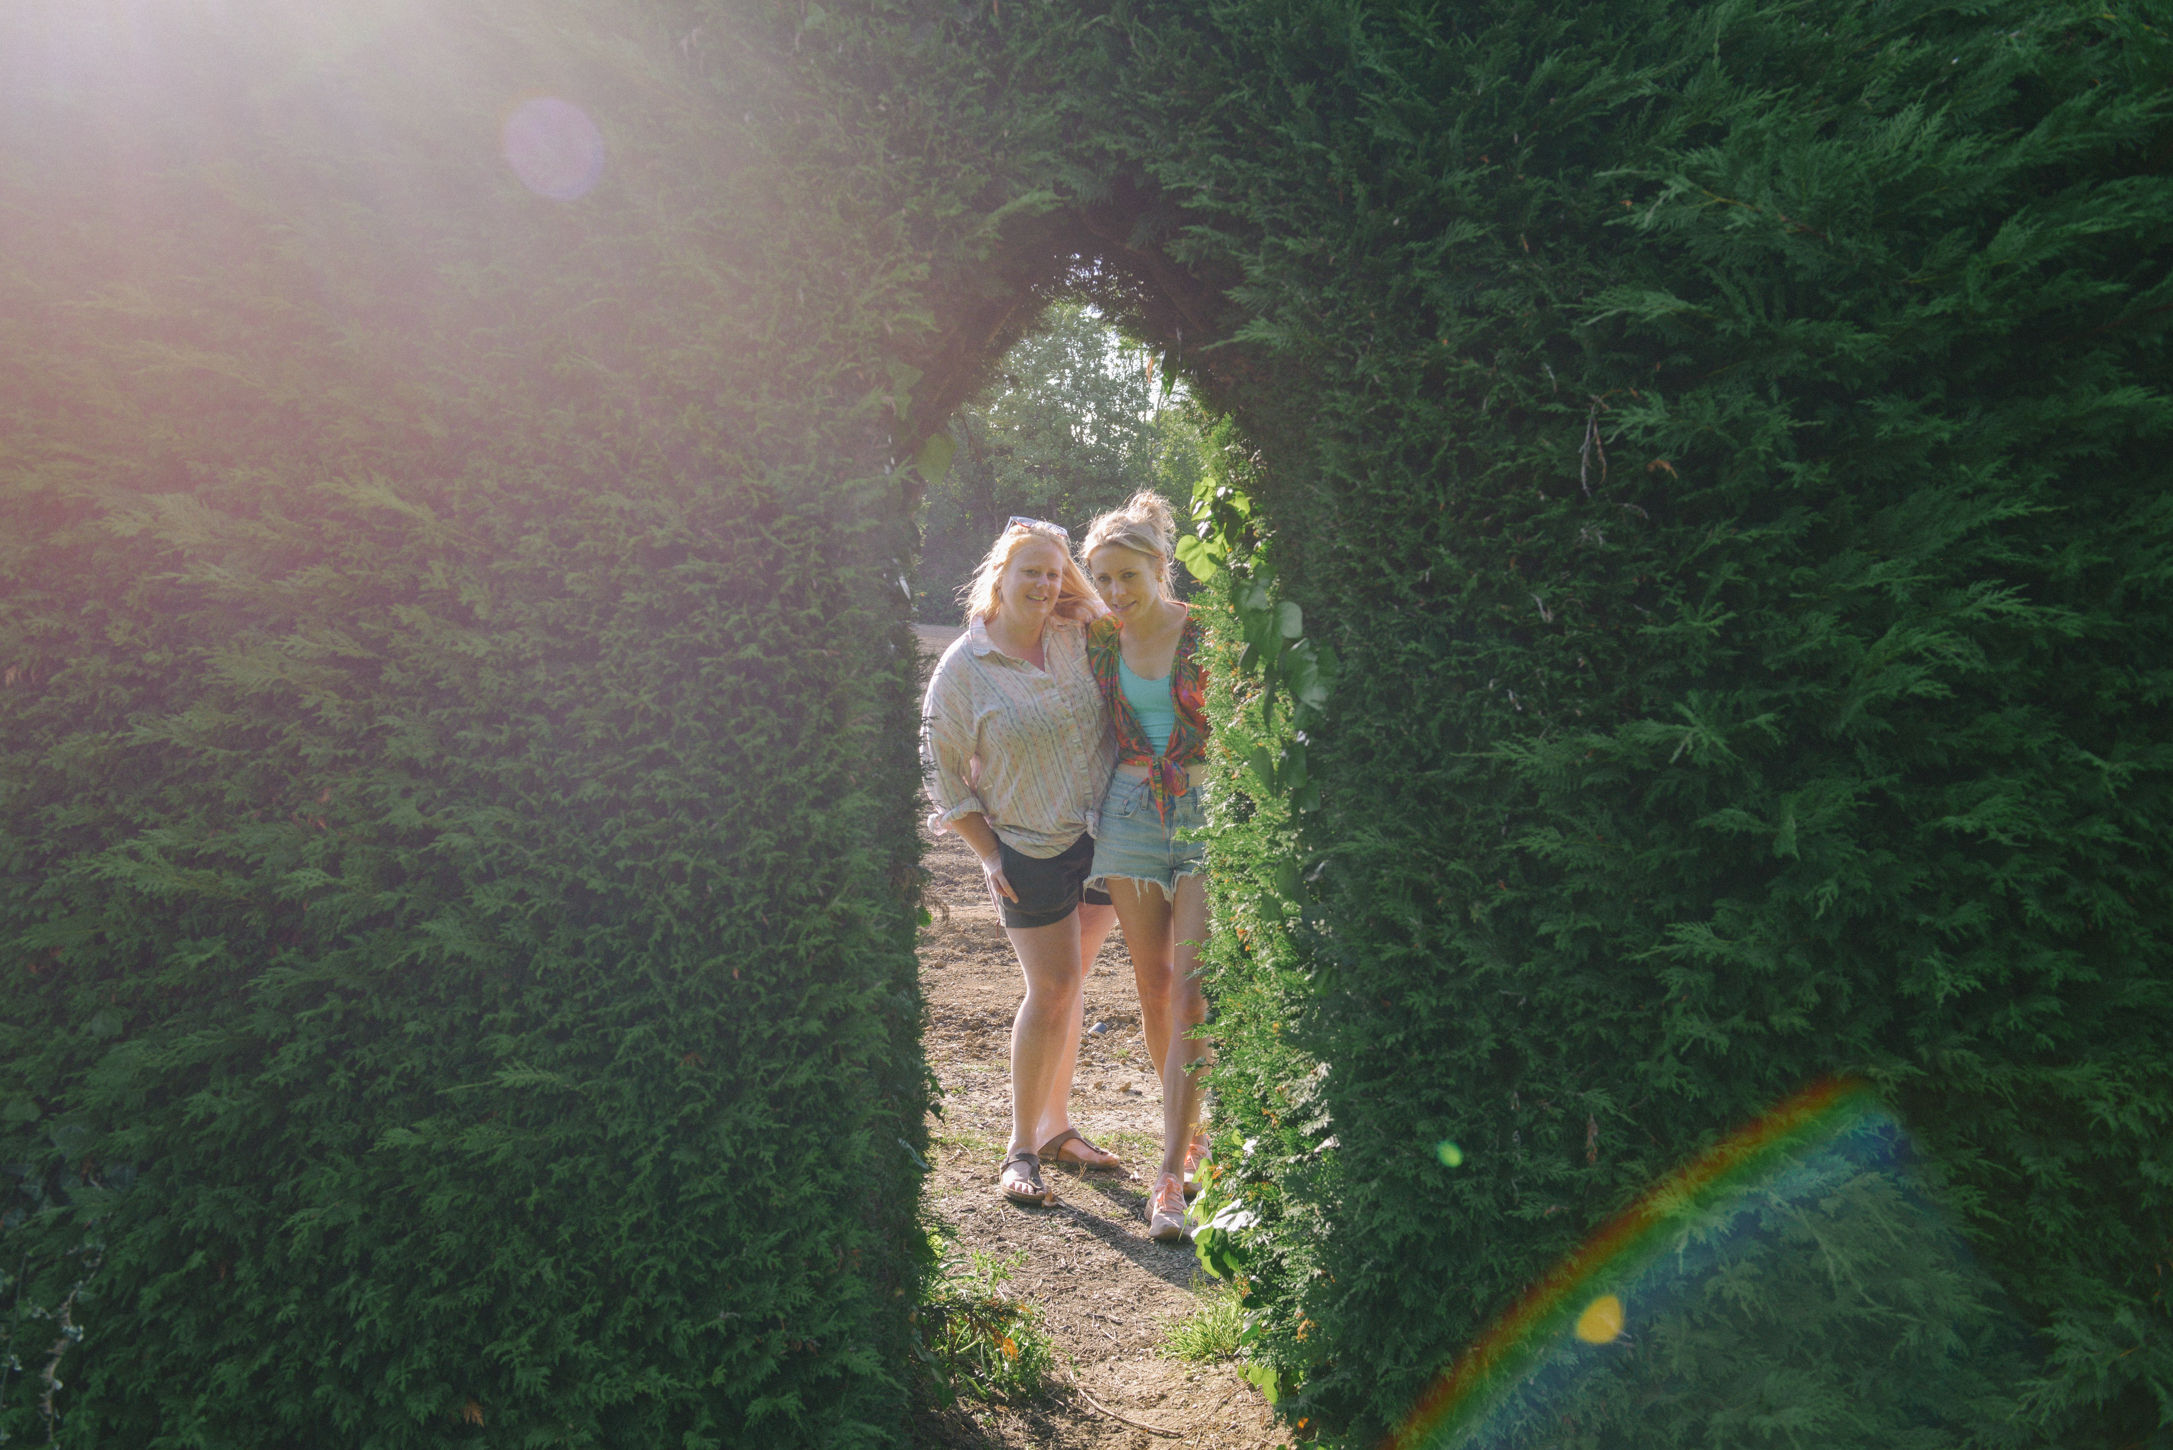 Helen and Vicky through the archway at The Secret Vineyard